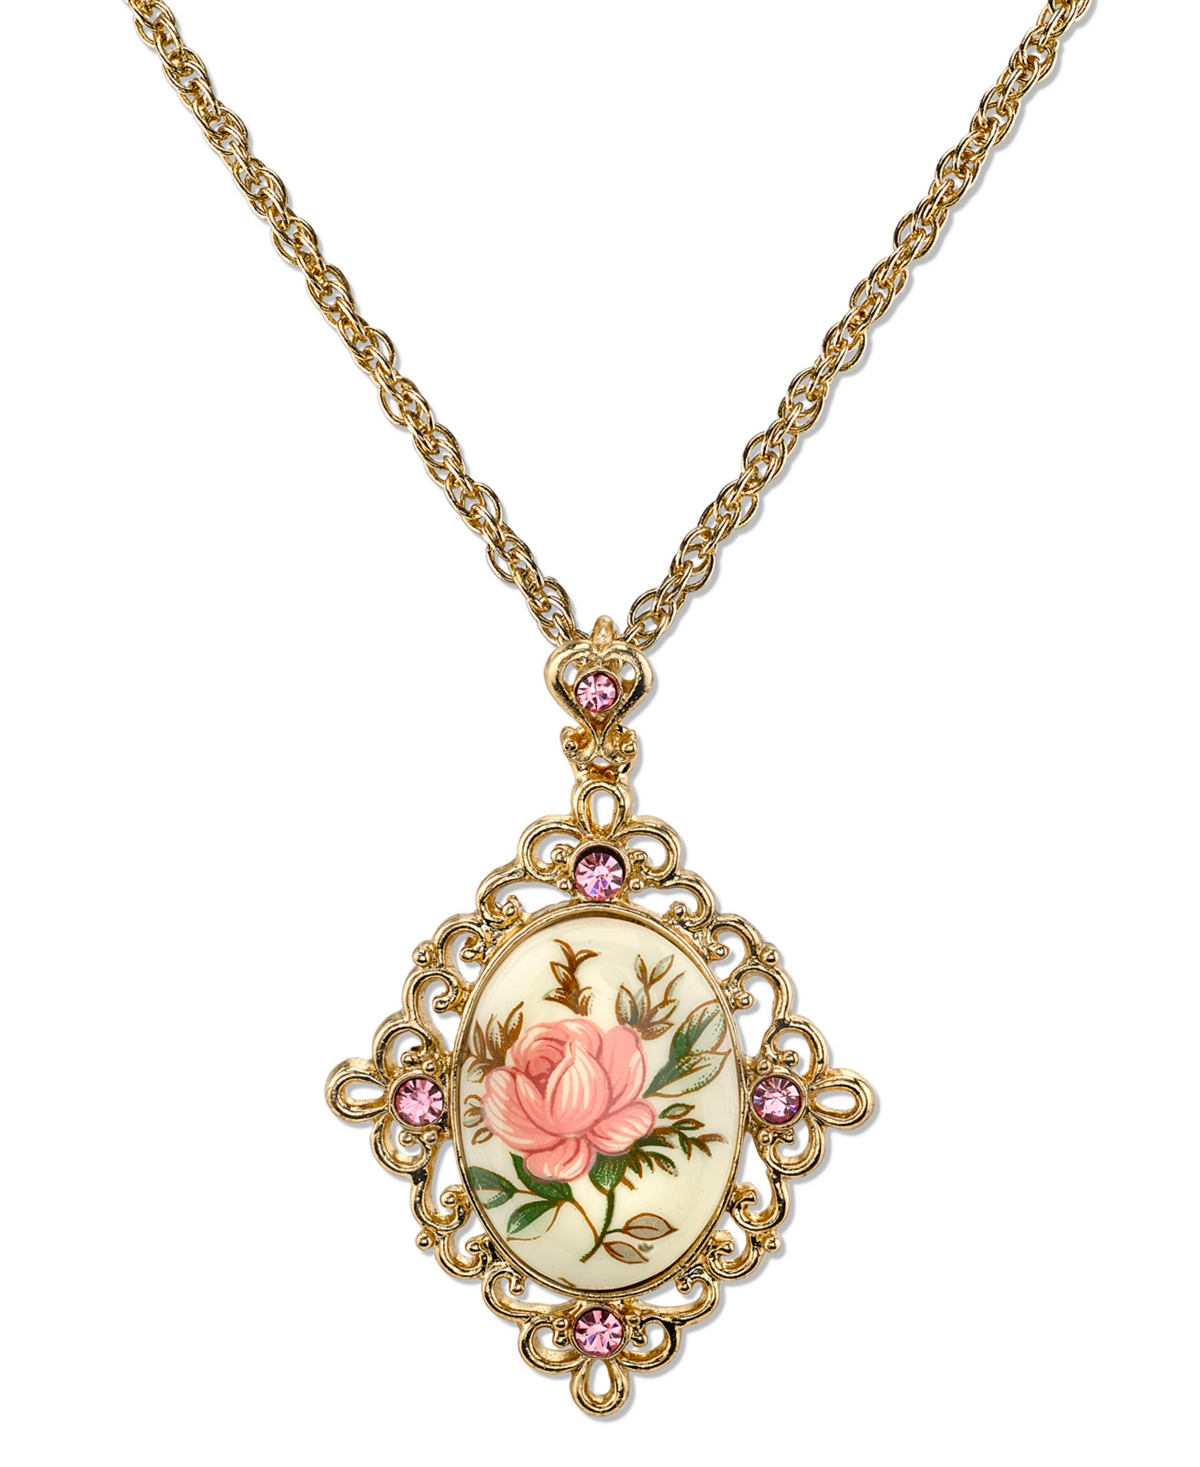 2028 Gold Tone Ivory Color Floral Decal Crystal Accent Pendant 16" Adjustable Necklace In Multi